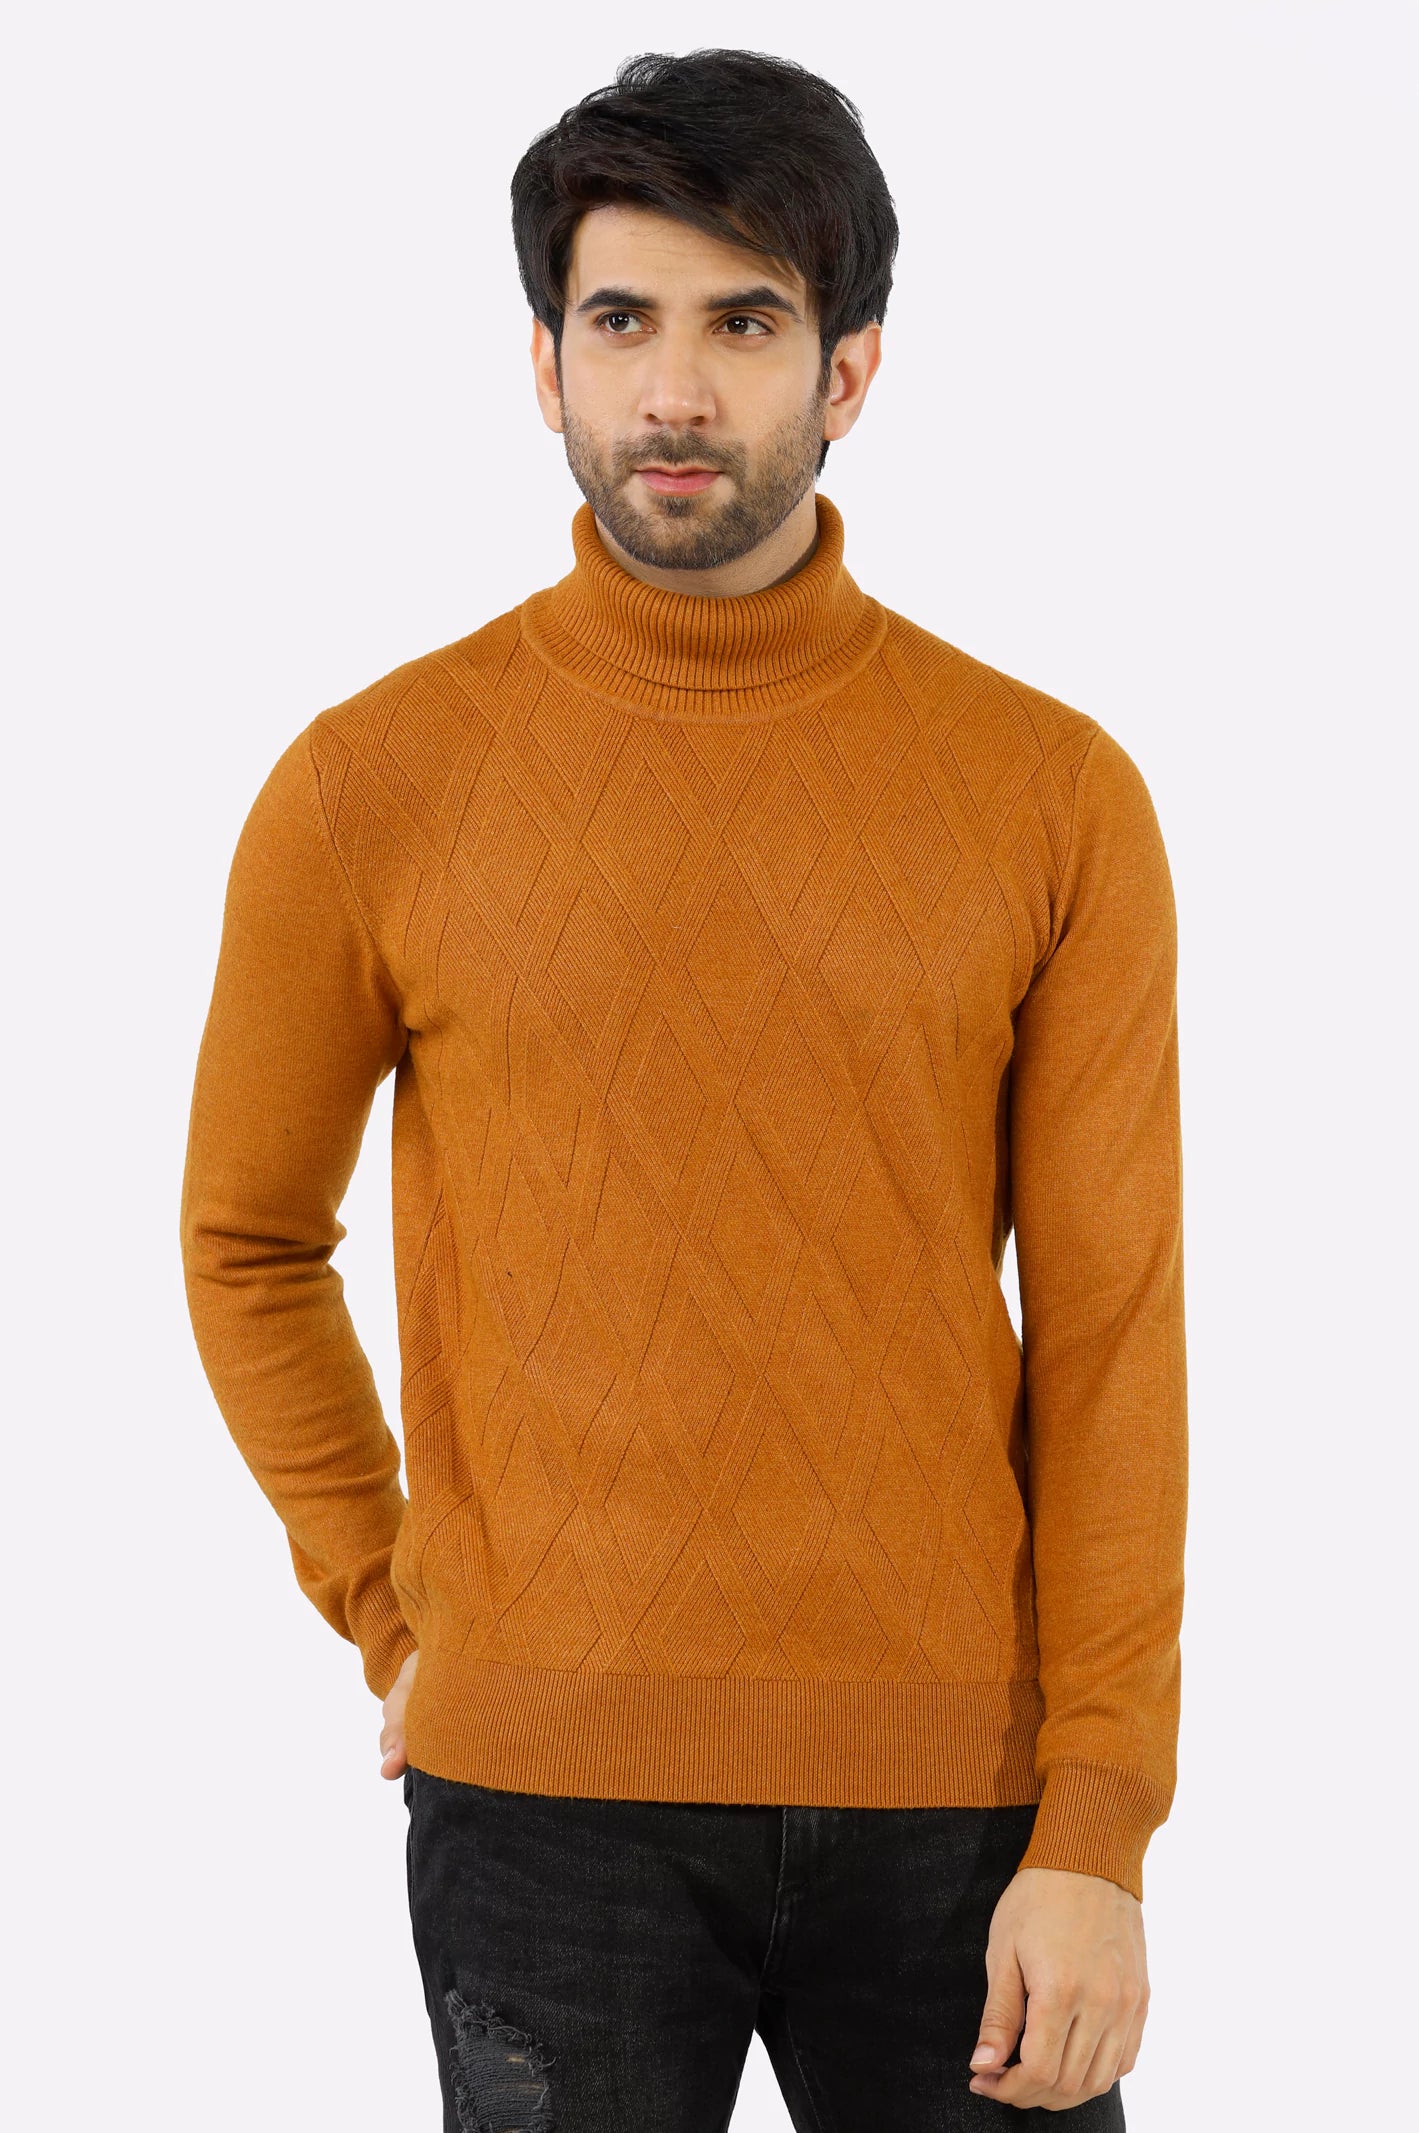 Mustard High Neck Gents Sweater From Diners